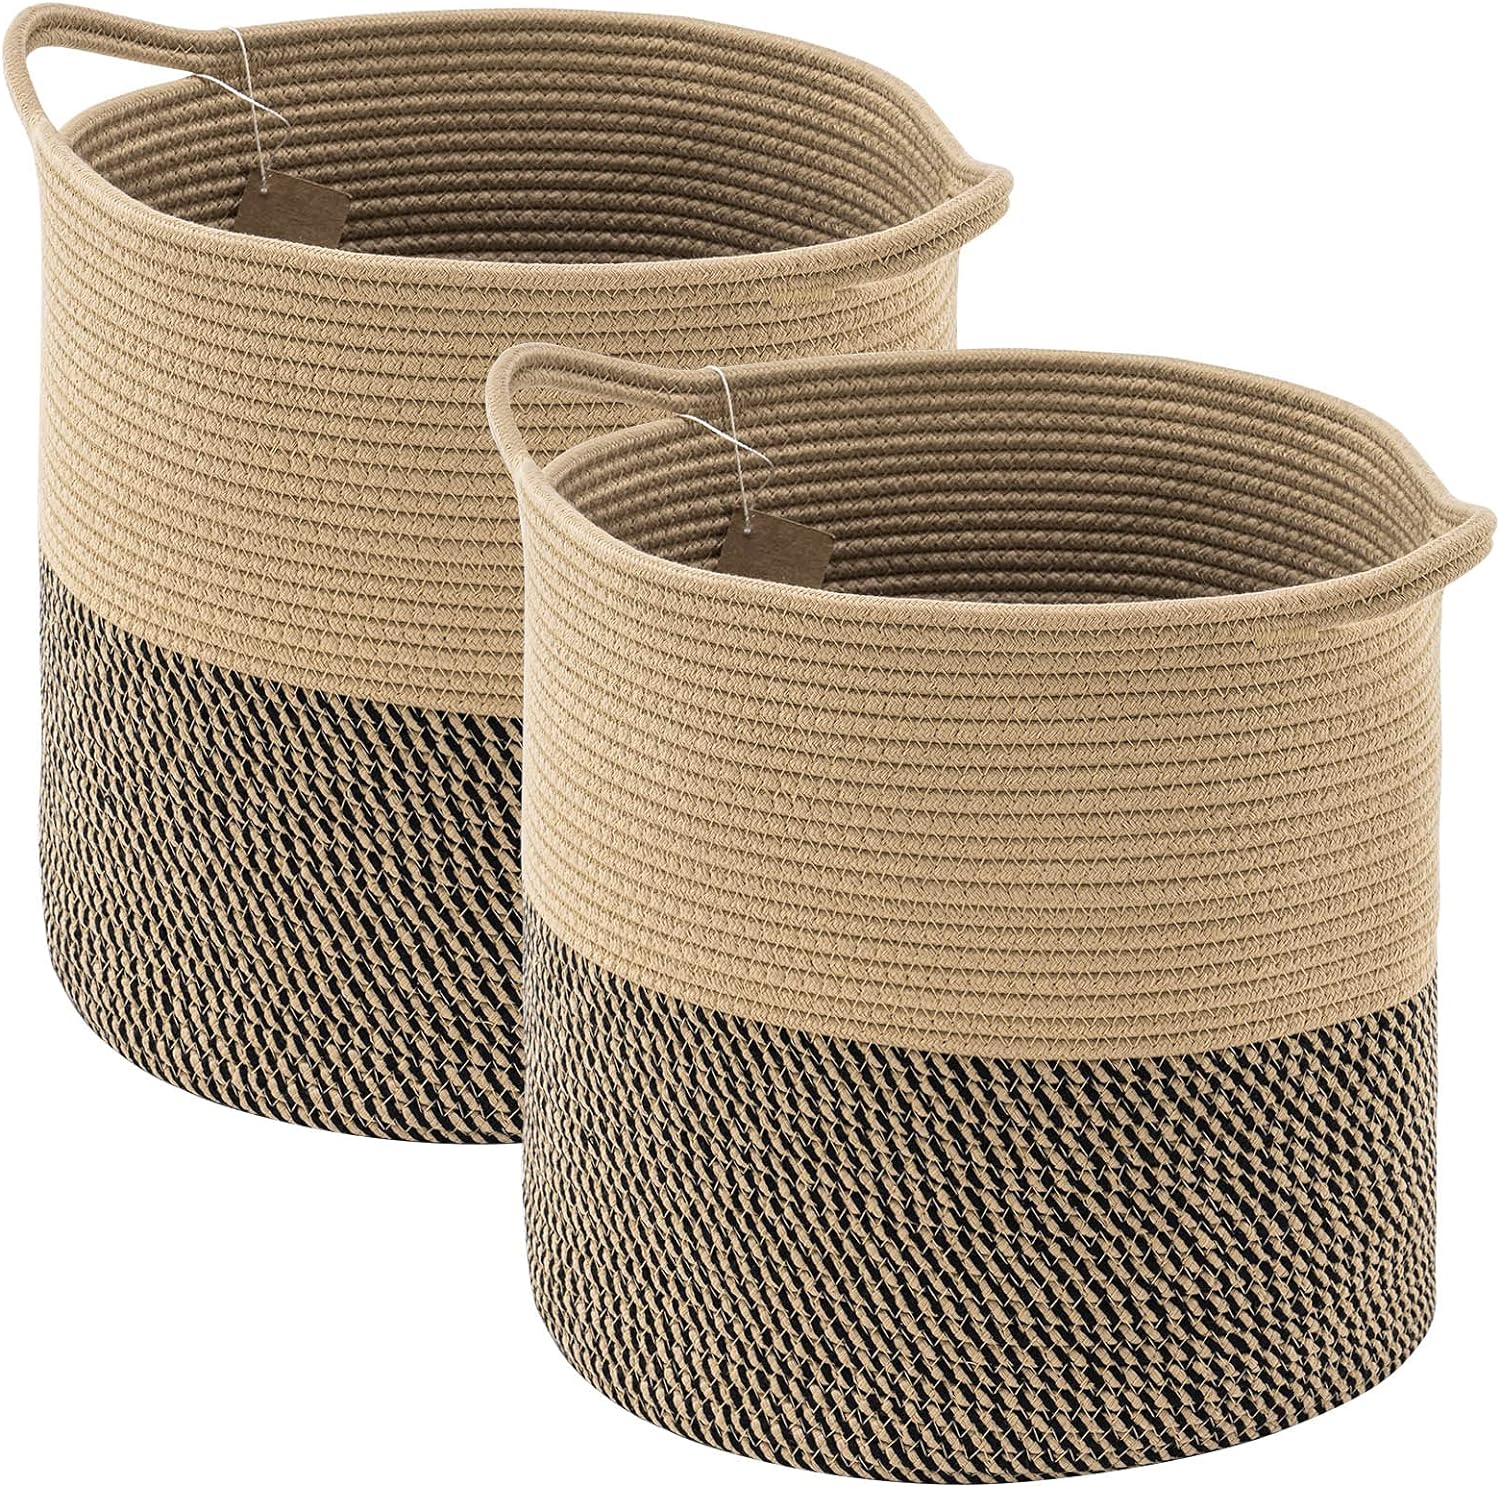 YOUDENOVA Cotton Rope Cube Storage Baskets, 13x13 Round Woven Baskets for Storage with Handles 2 Pack, Modern Decorative Storage Bins Dcor Baskets for 13 inch Cube Storage Shelves, Black & Jute